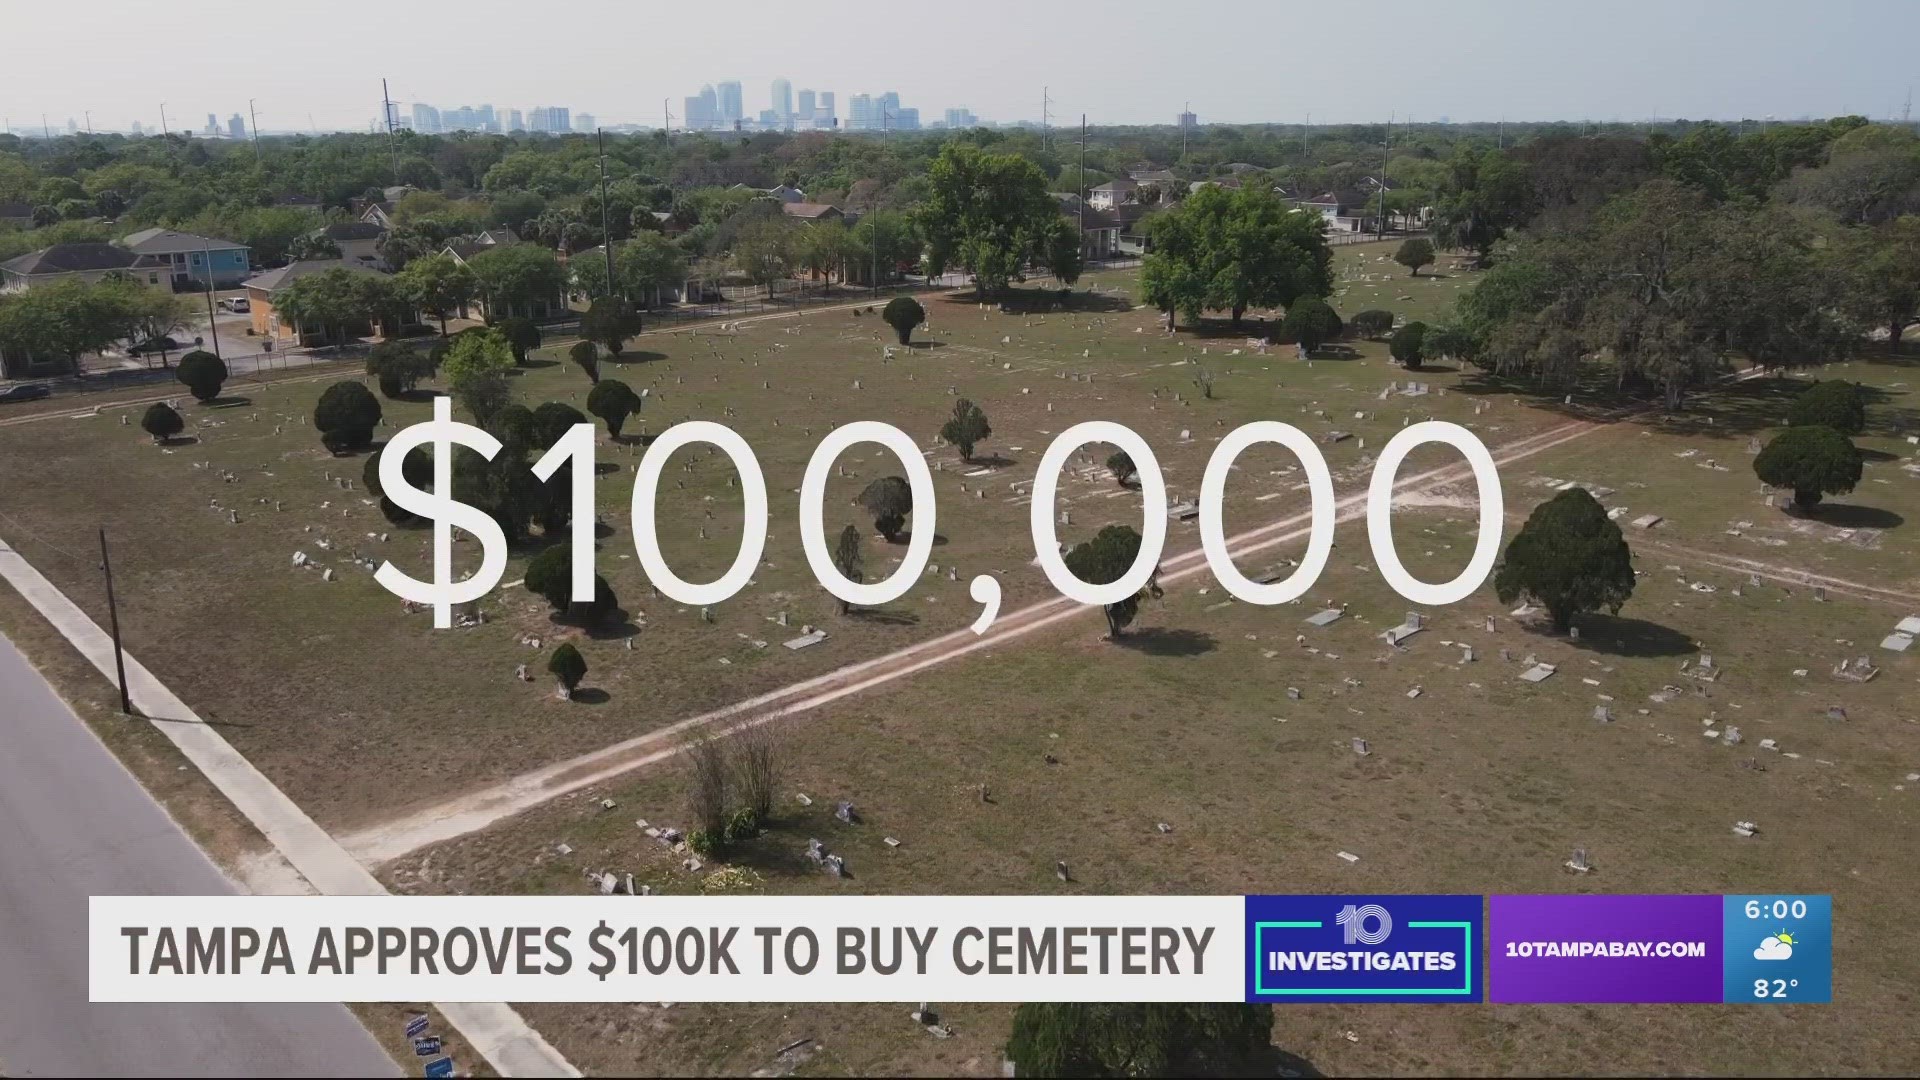 City council members approved the $100,000 purchase agreement of Memorial Park Cemetery from Alexis Arteaga of 2714 West Sligh LLC.